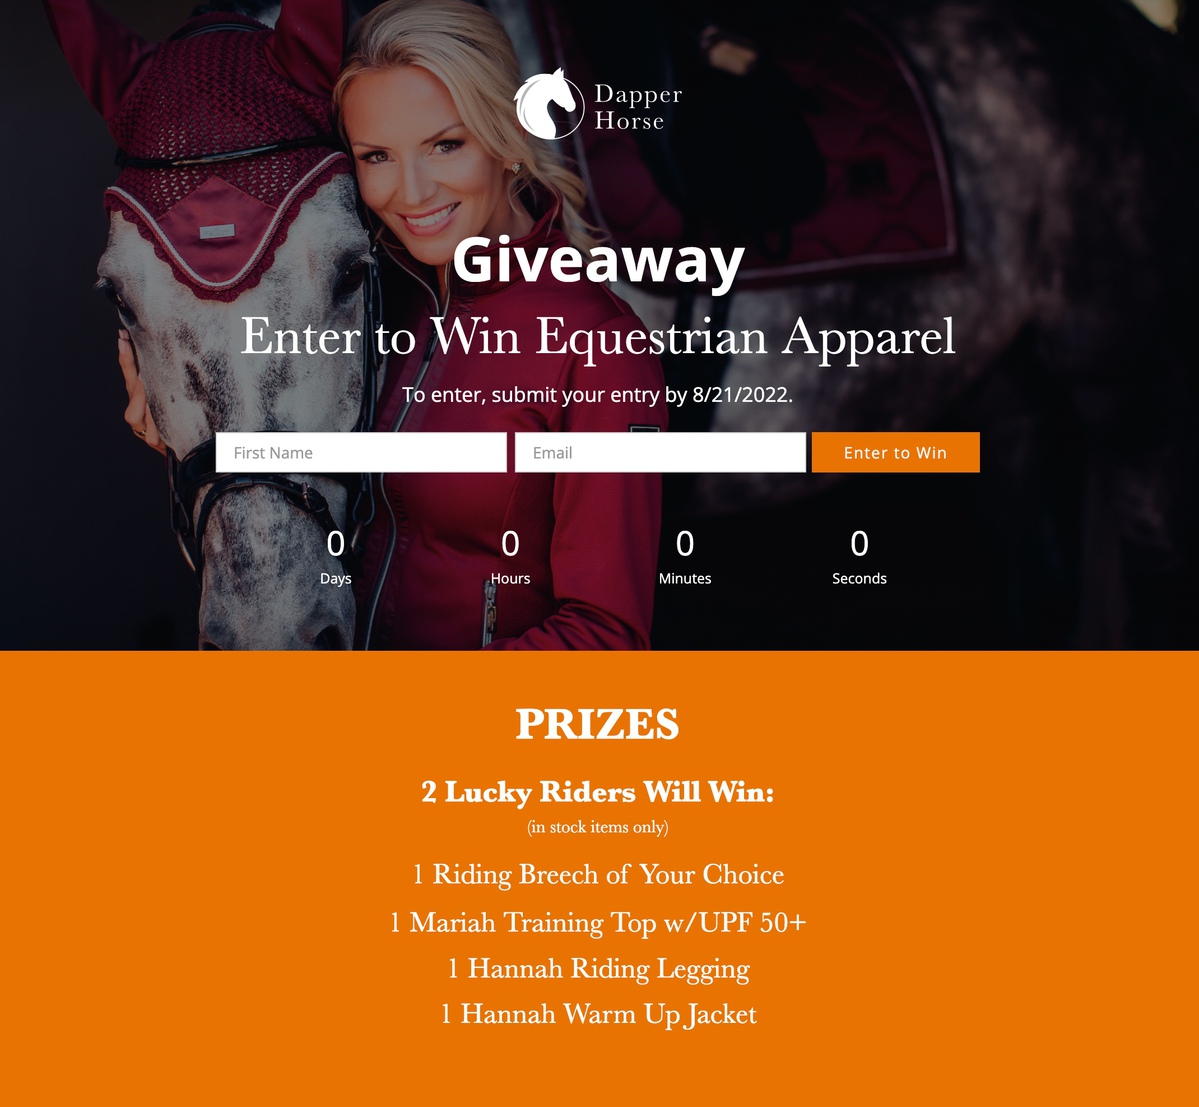 Enter to win equestrian apparel- prizes include four different apparel items from store